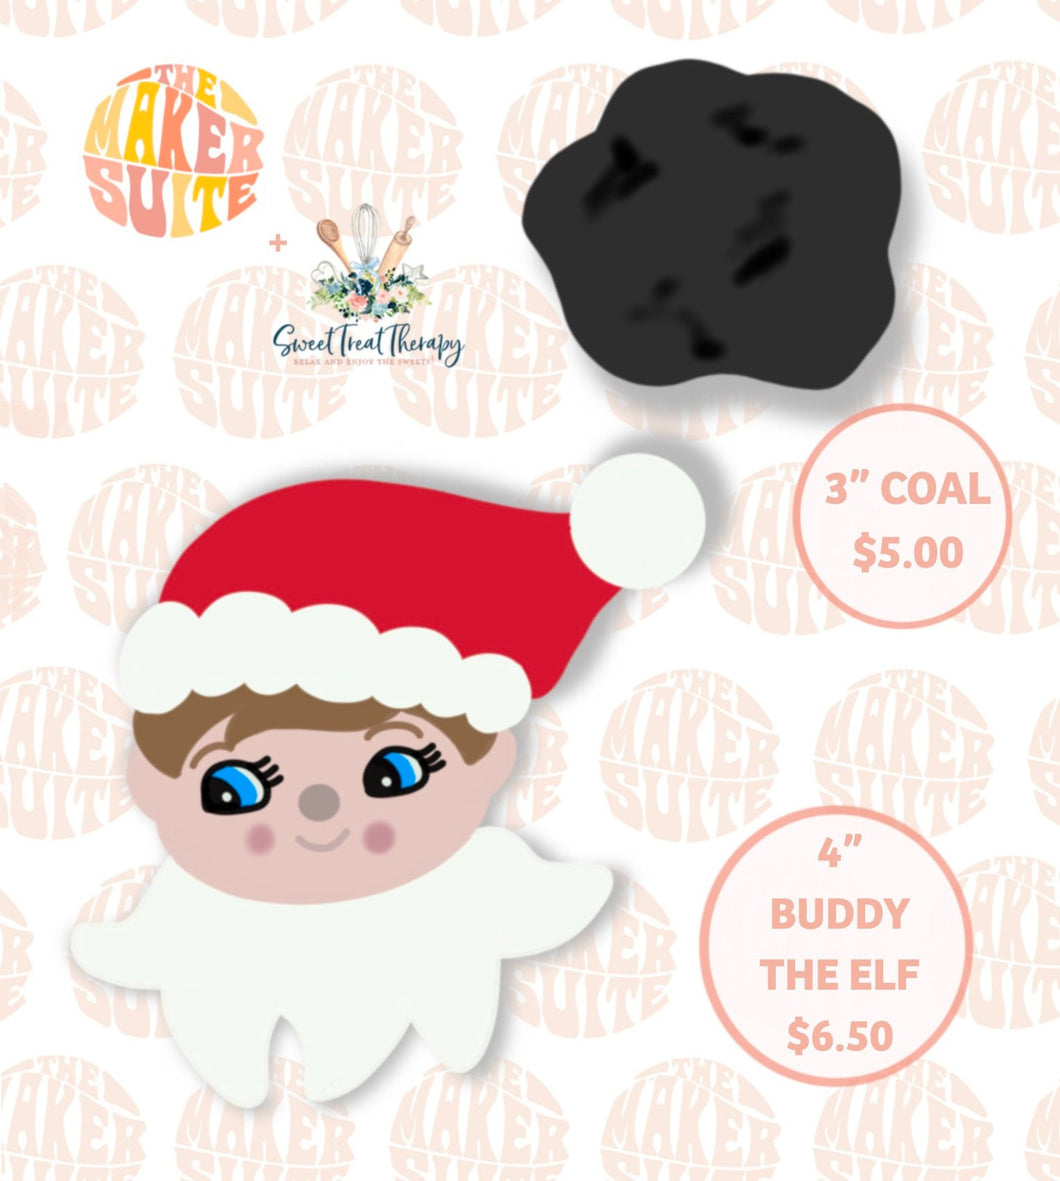 Buddy the Elf + Coal: by Sweet Treat Therapy